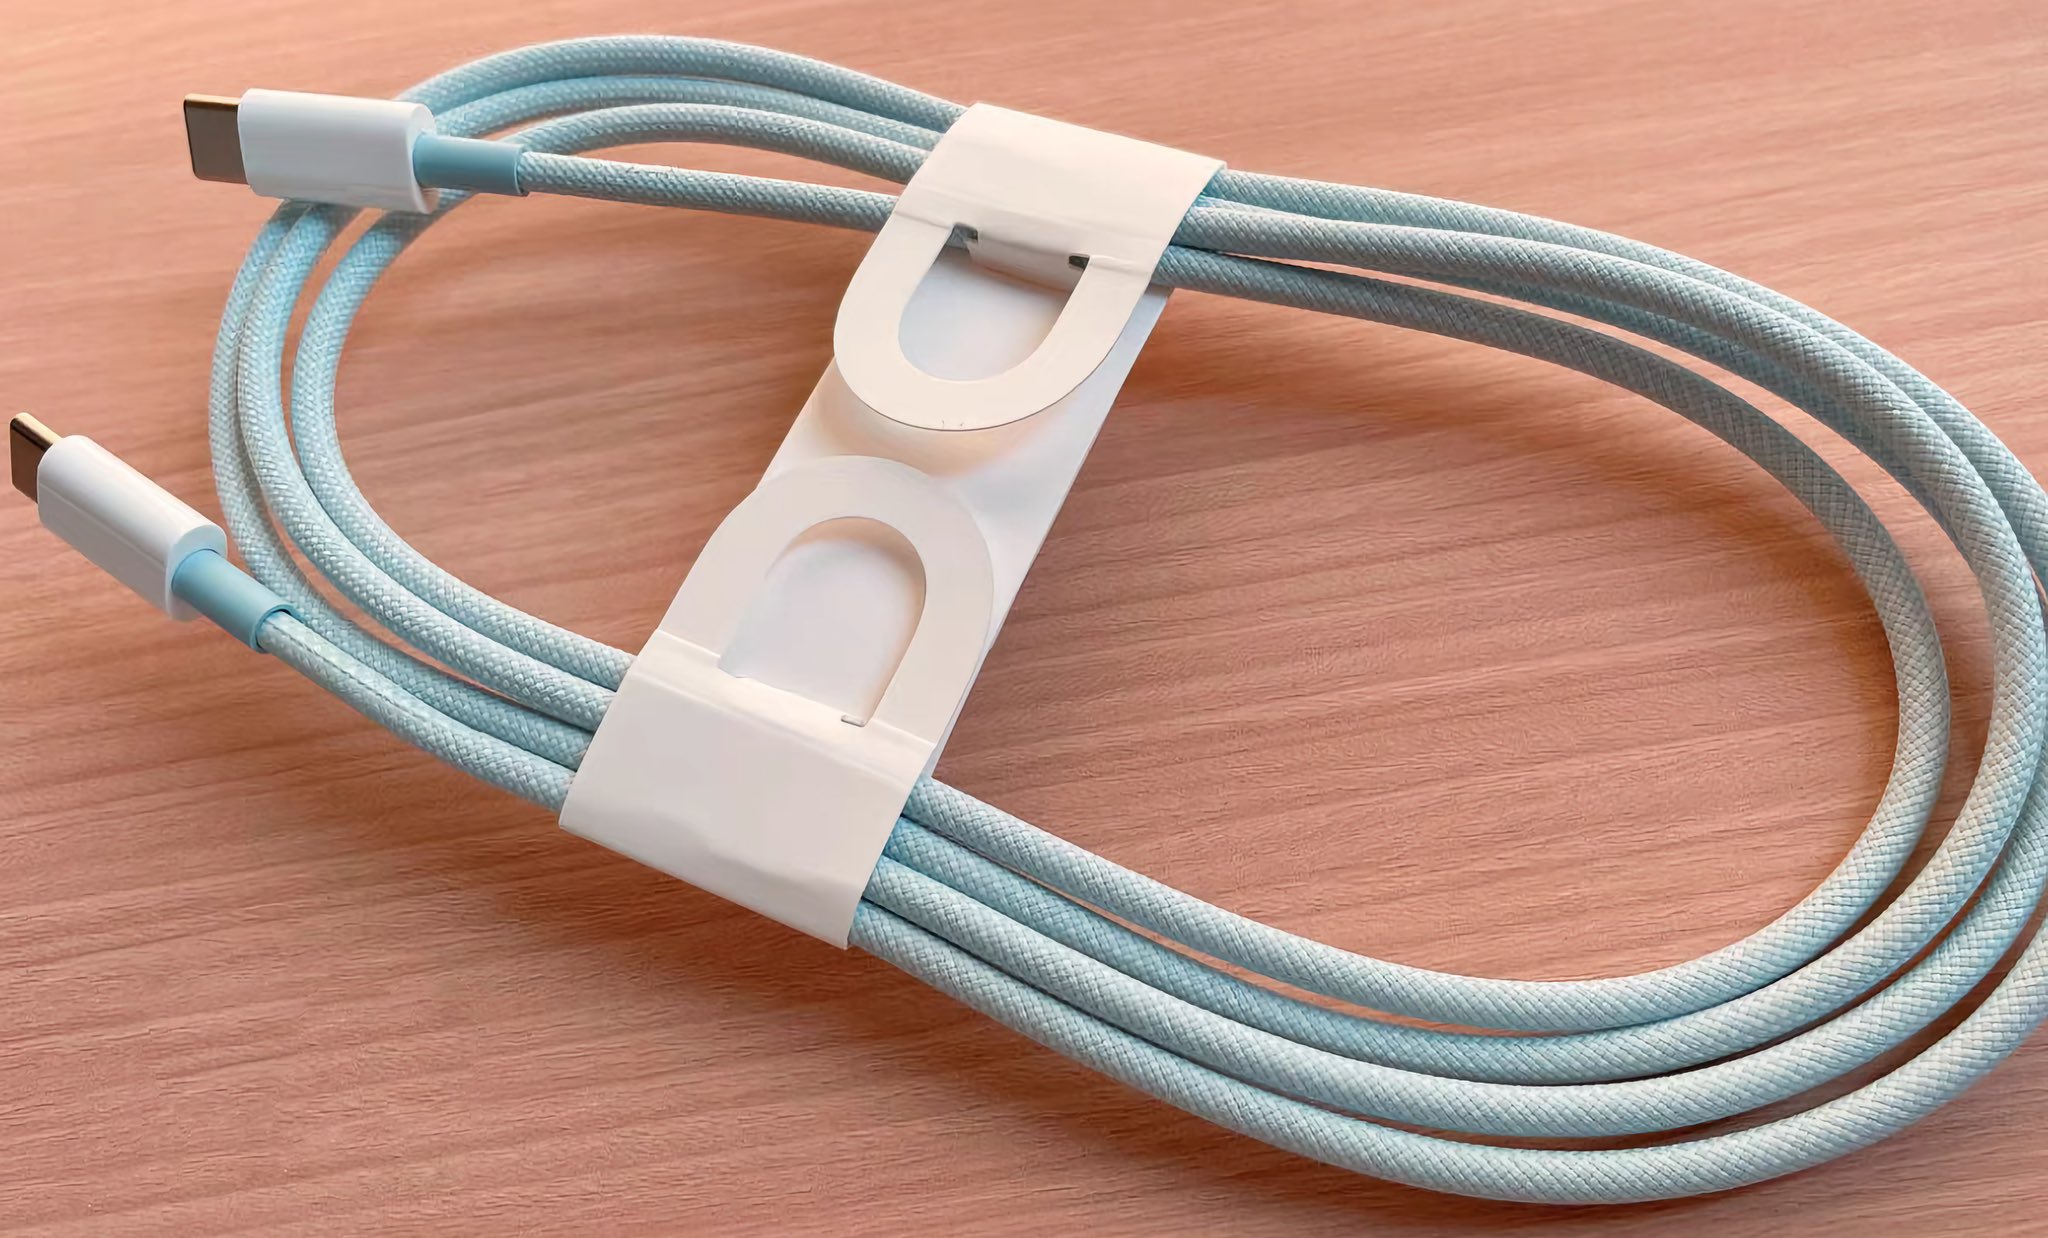 Apple USB-C cable